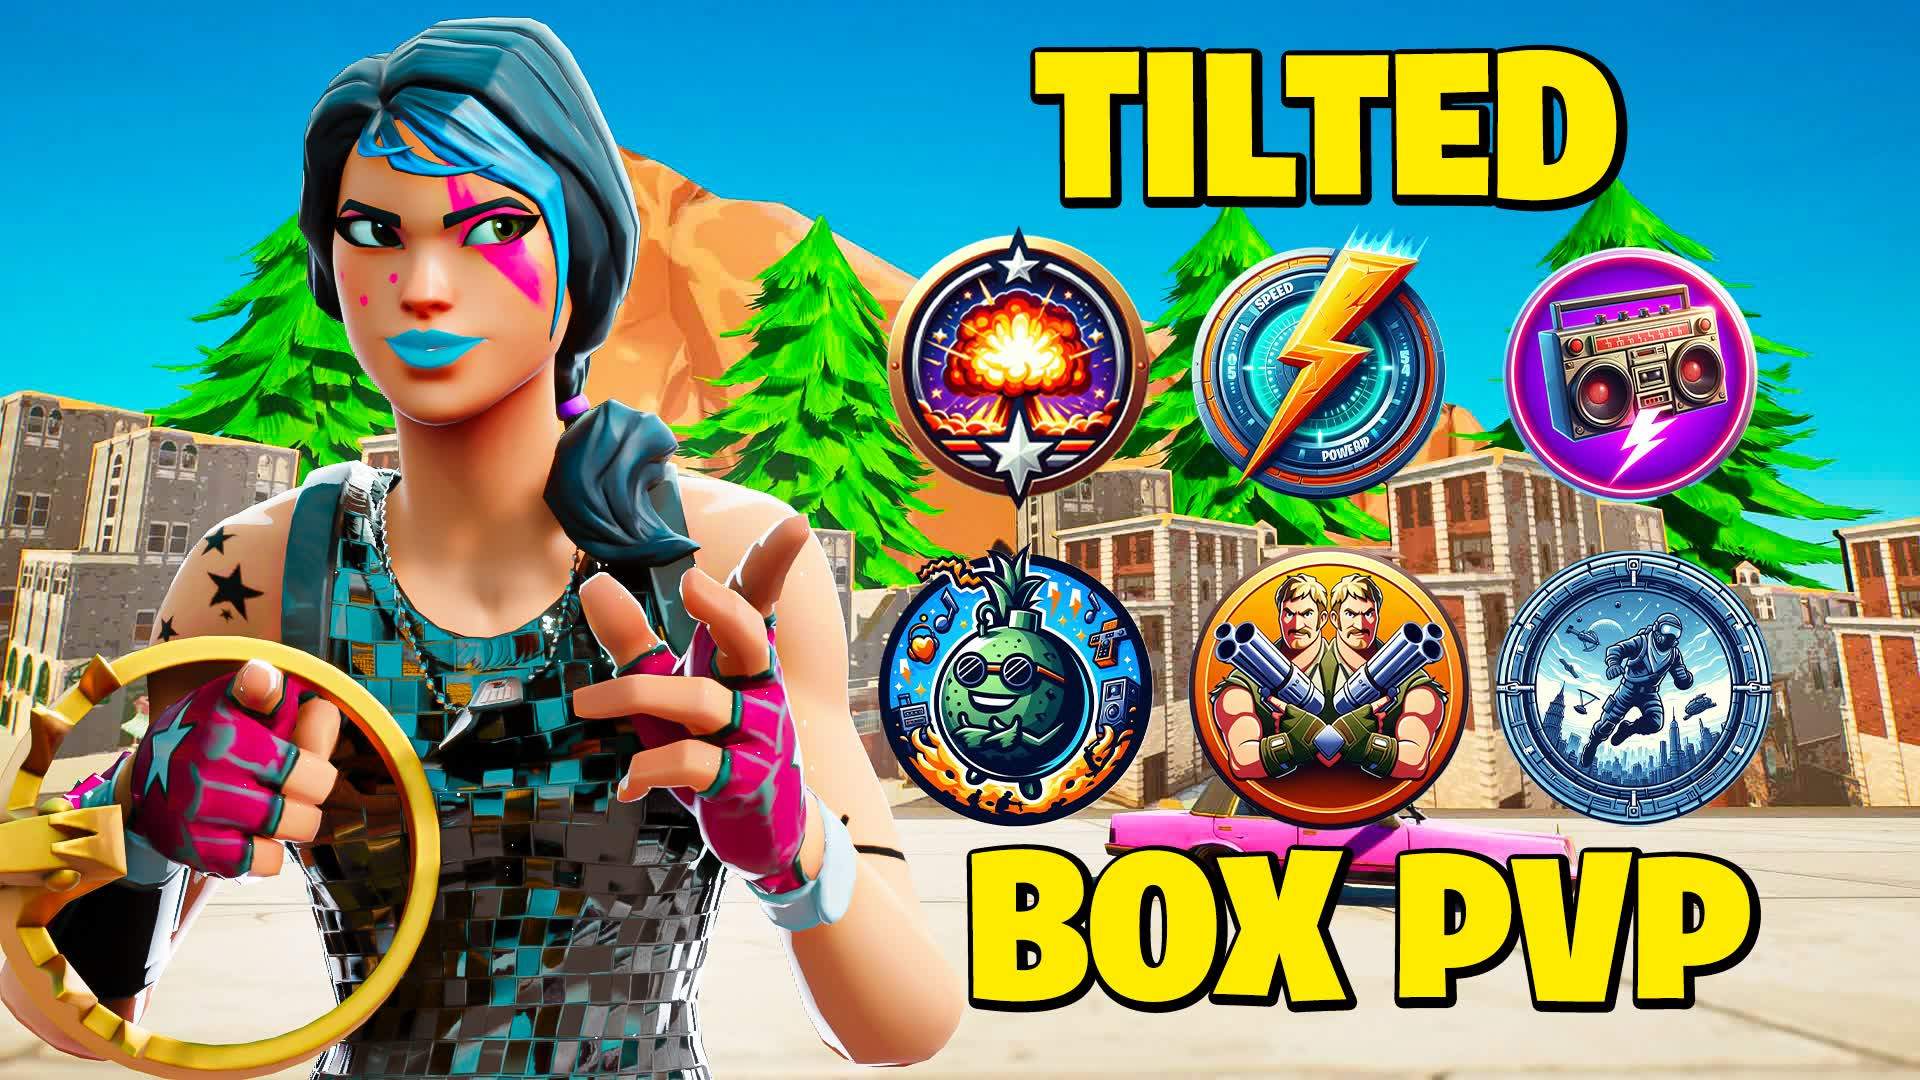 TILTED TOWERS BOX PVP